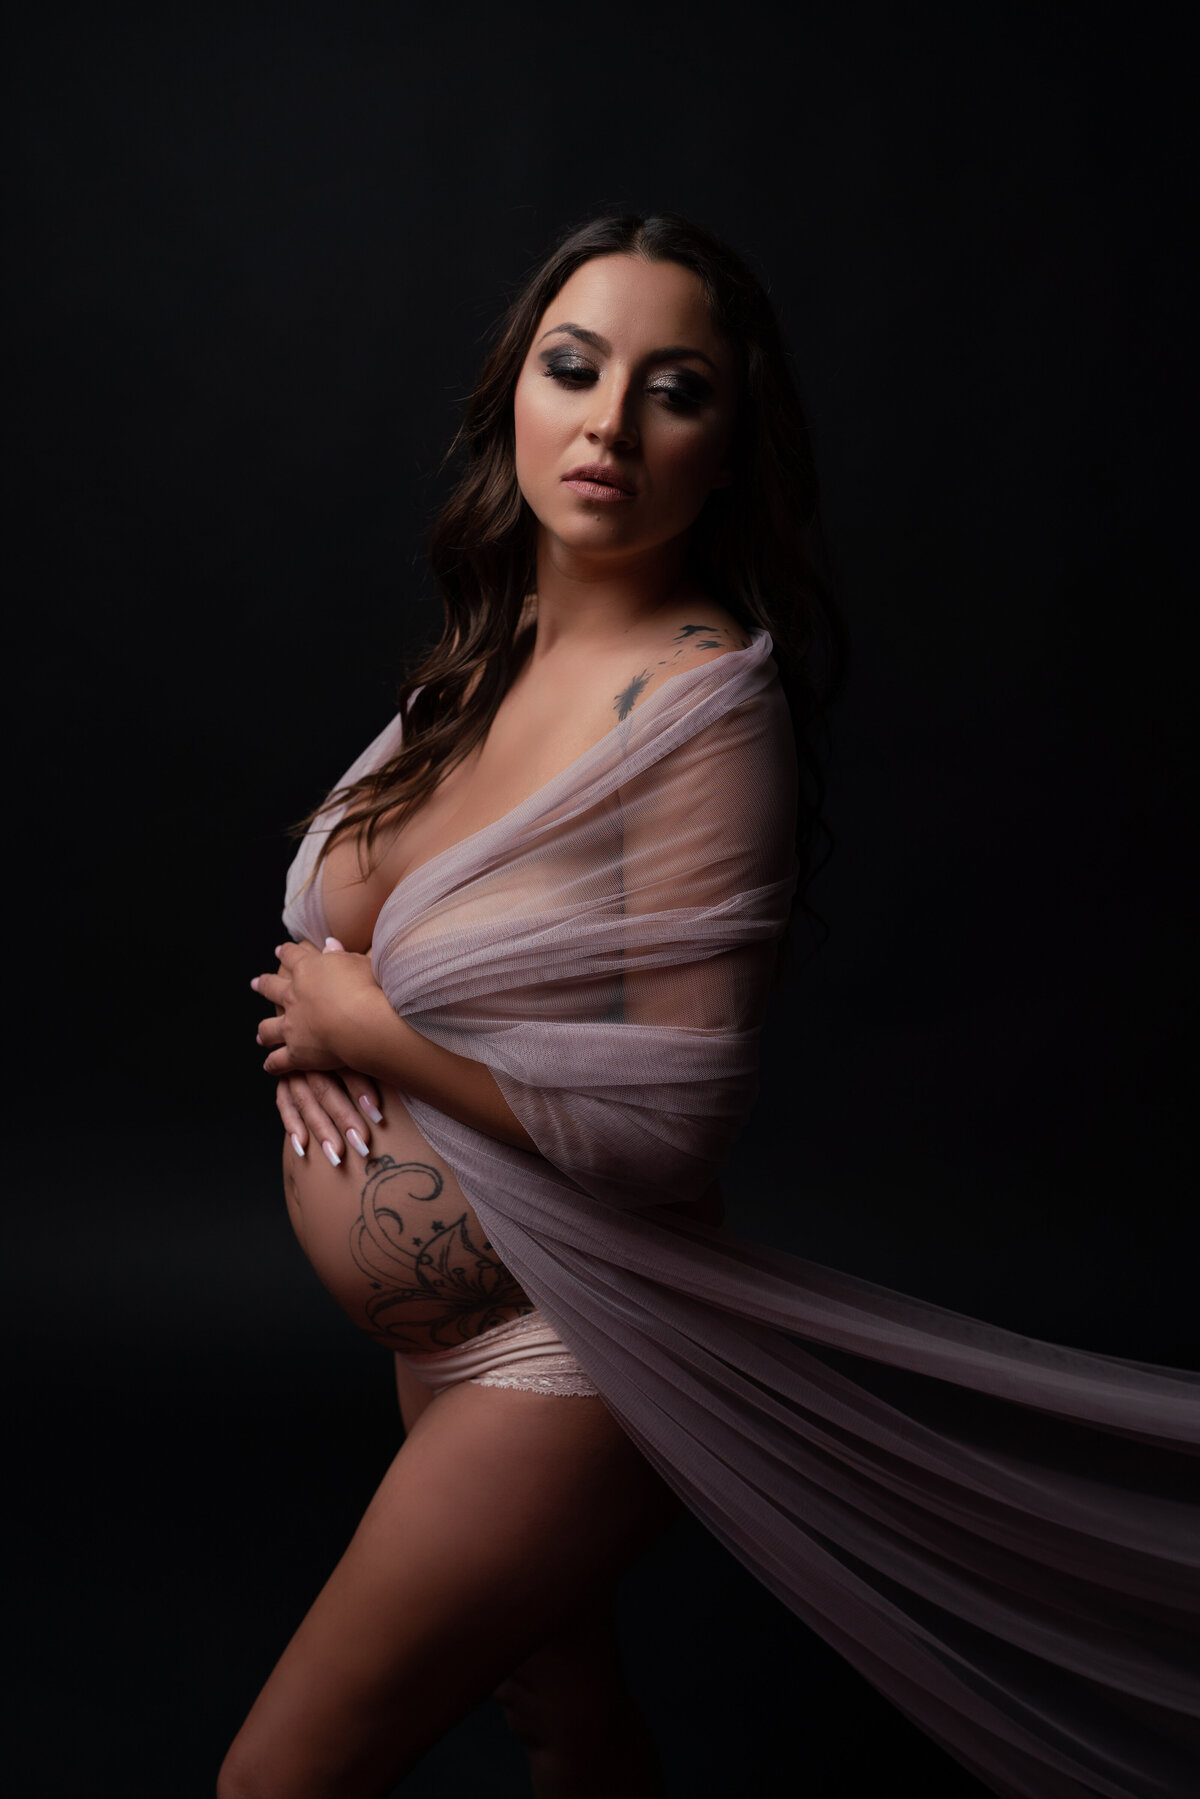 Pregnant Woman in Fabric